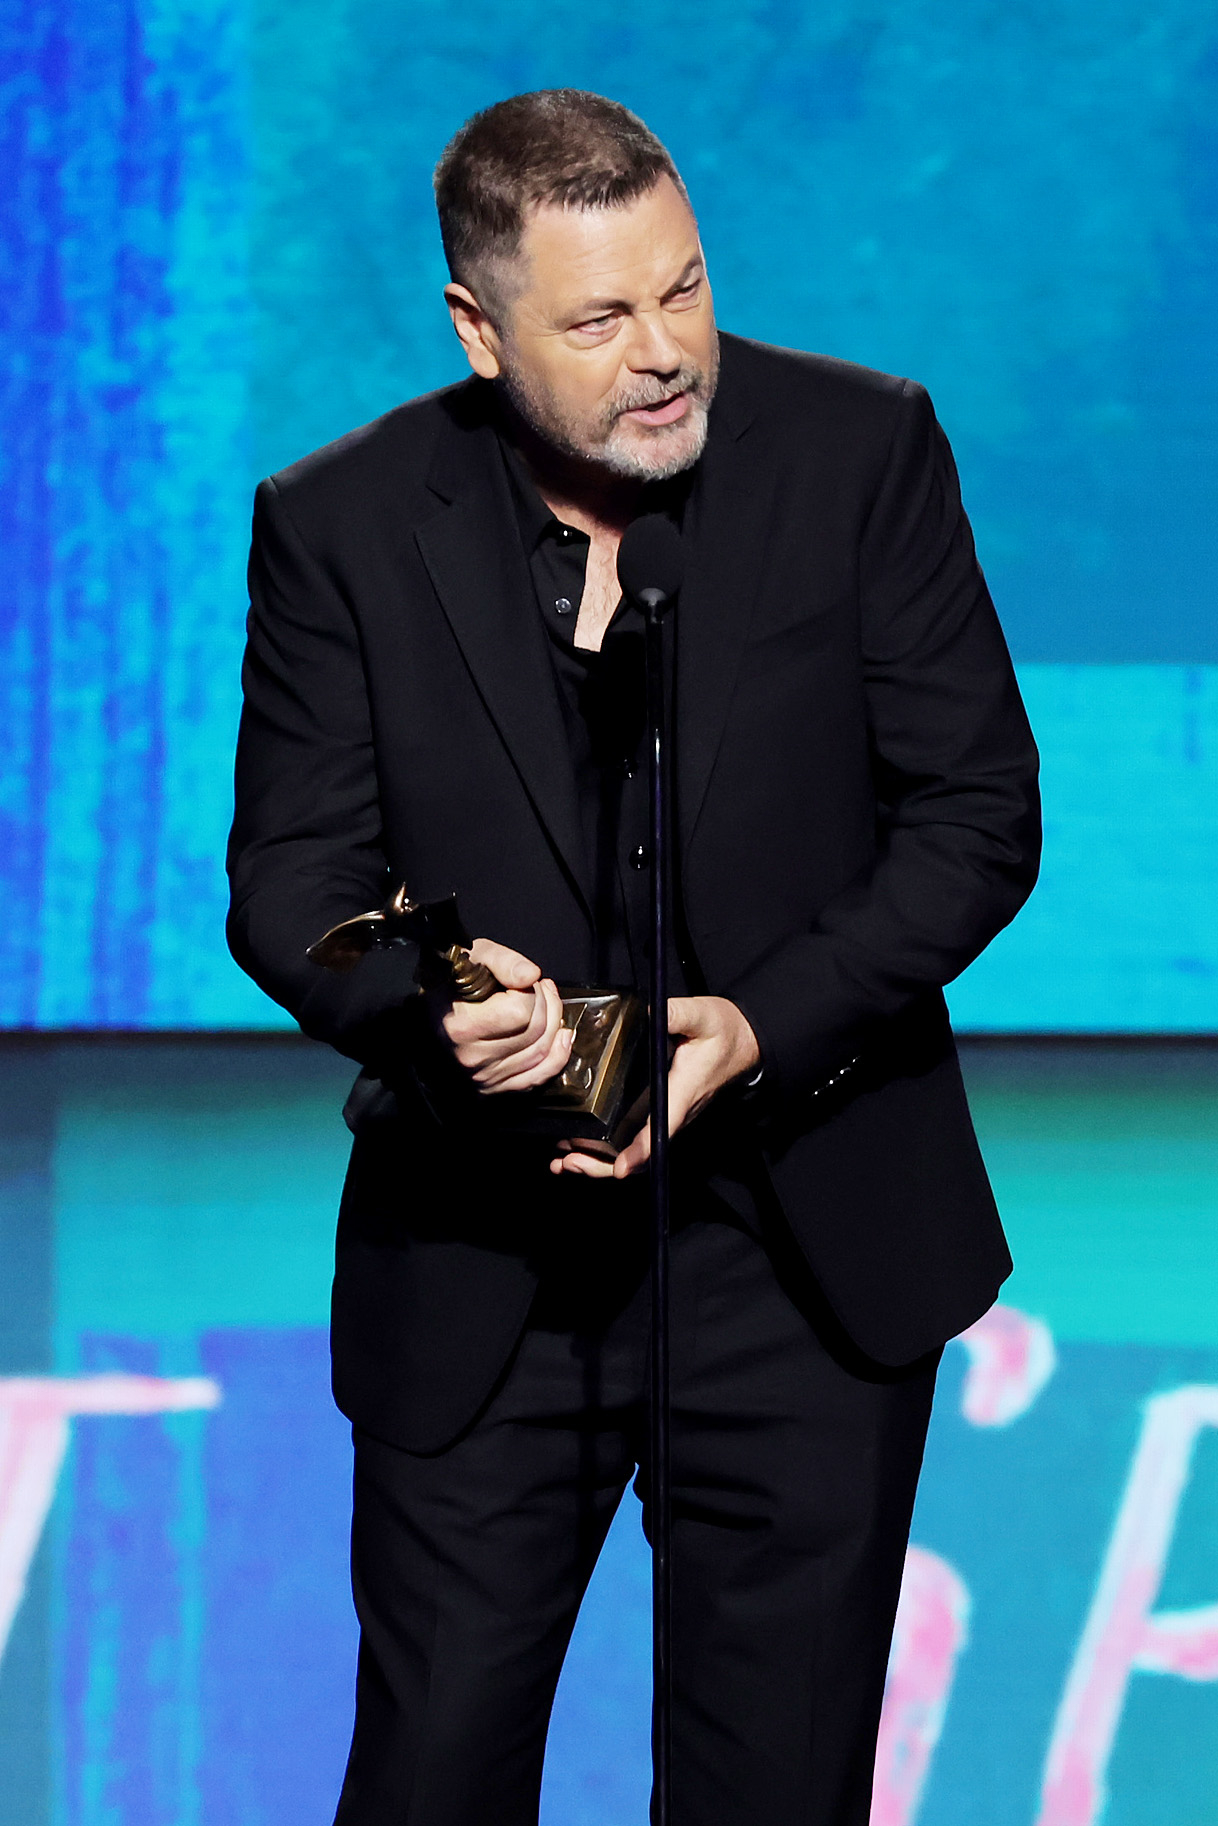 Nick Offerman in a suit holding his award onstage